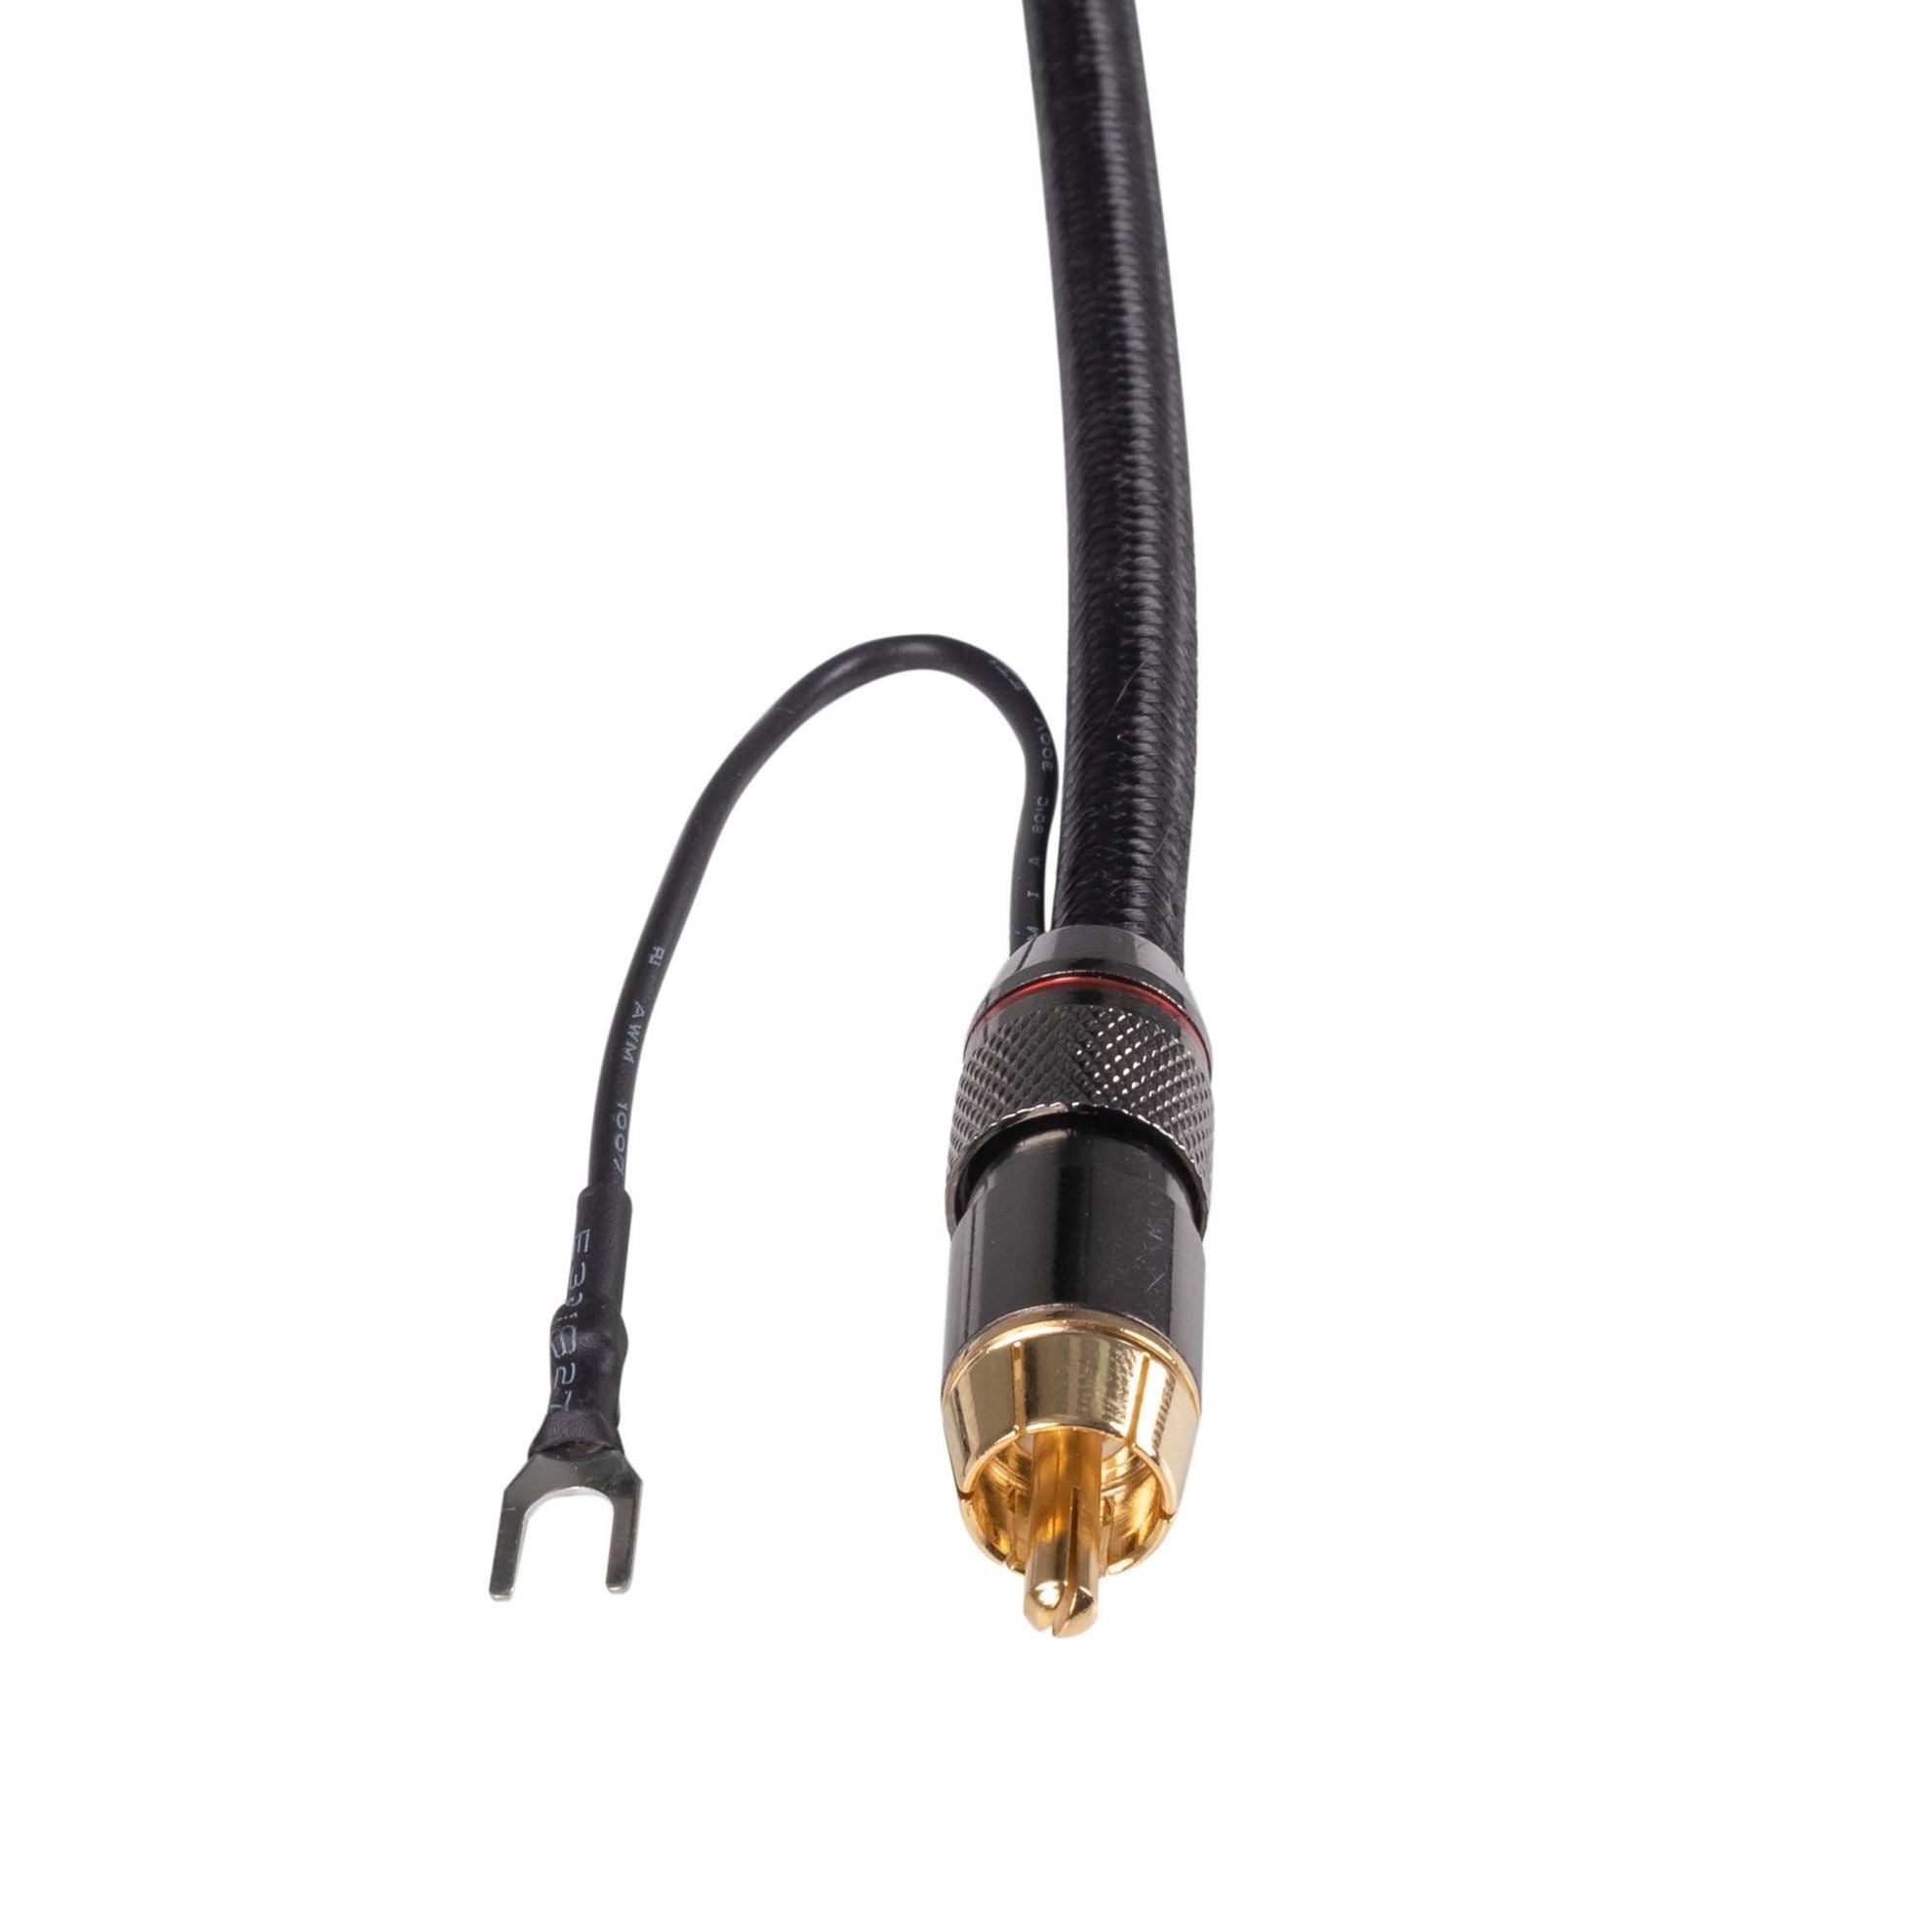 DYNAMIX_0.75m_Coaxial_Subwoofer_Cable_RCA_Male_to_Male_with_Grounding_Spade_Connectors 516